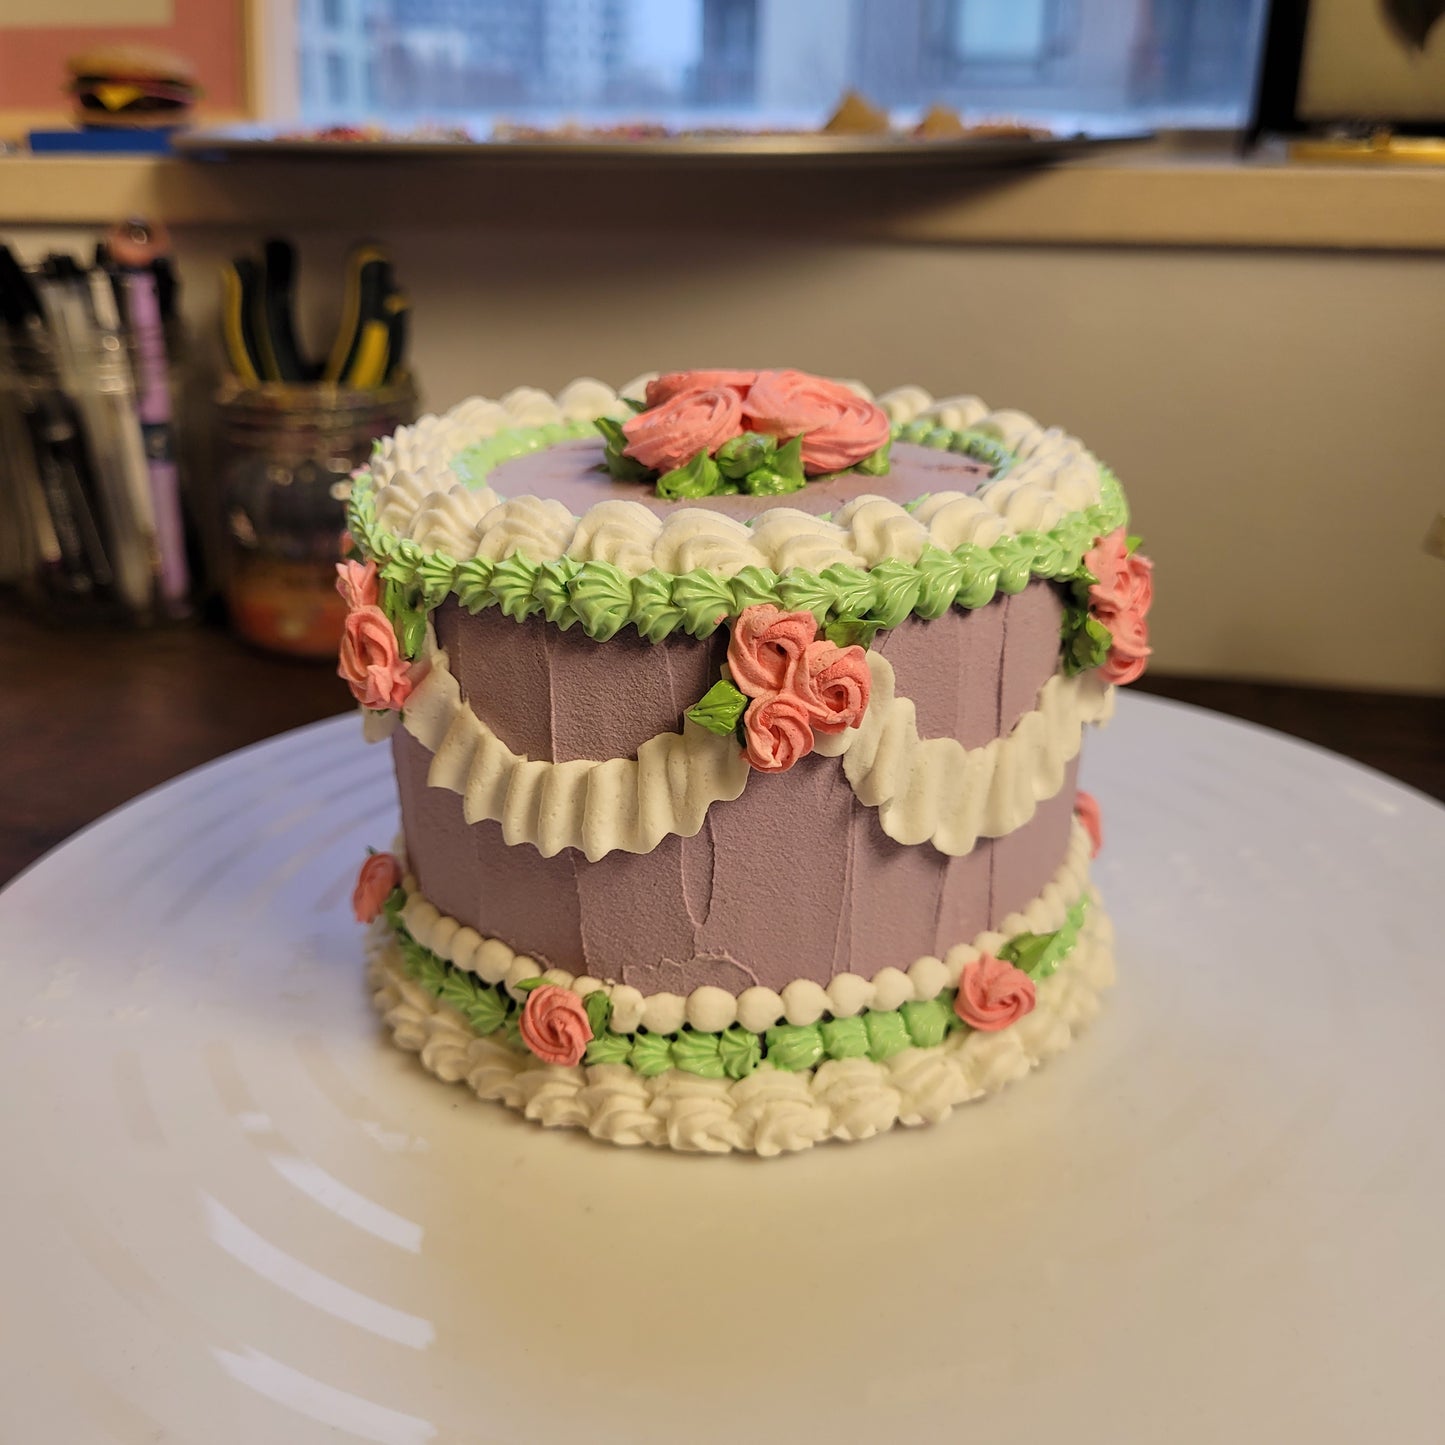 Cake Sculpture | 4.5" by 3"